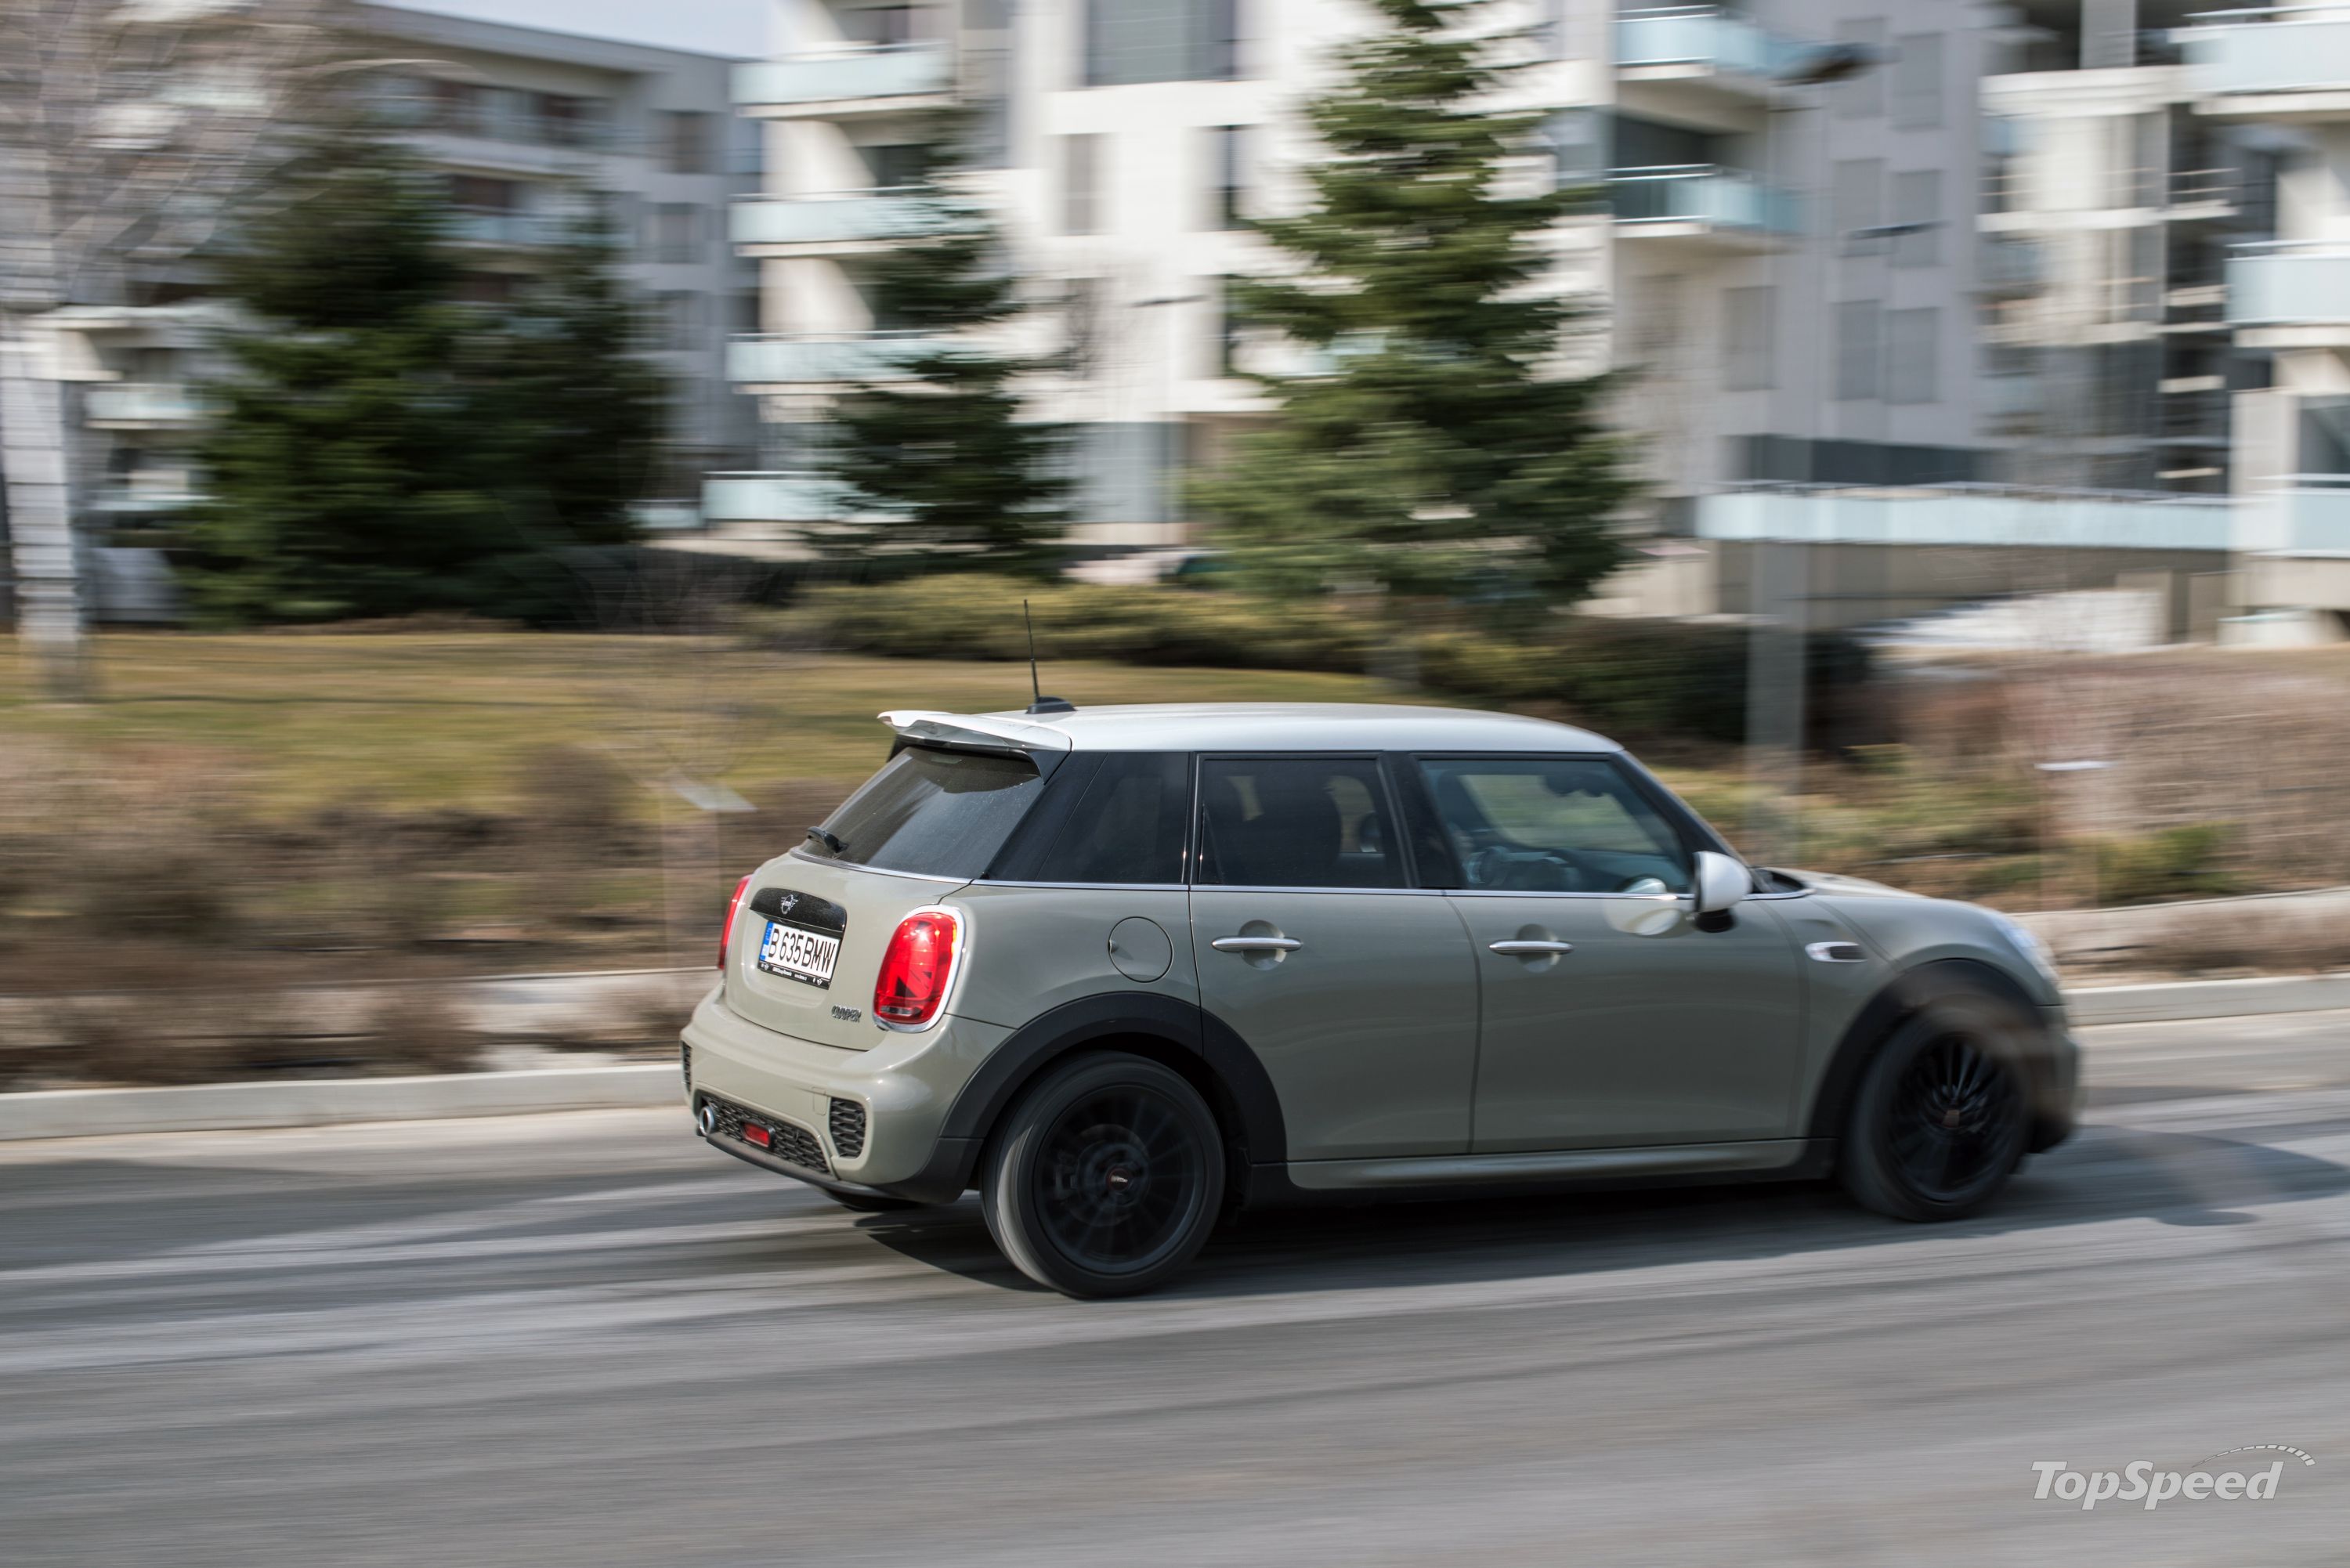 2019 MINI Cooper 5D hatchback with Sport Pack - Driven